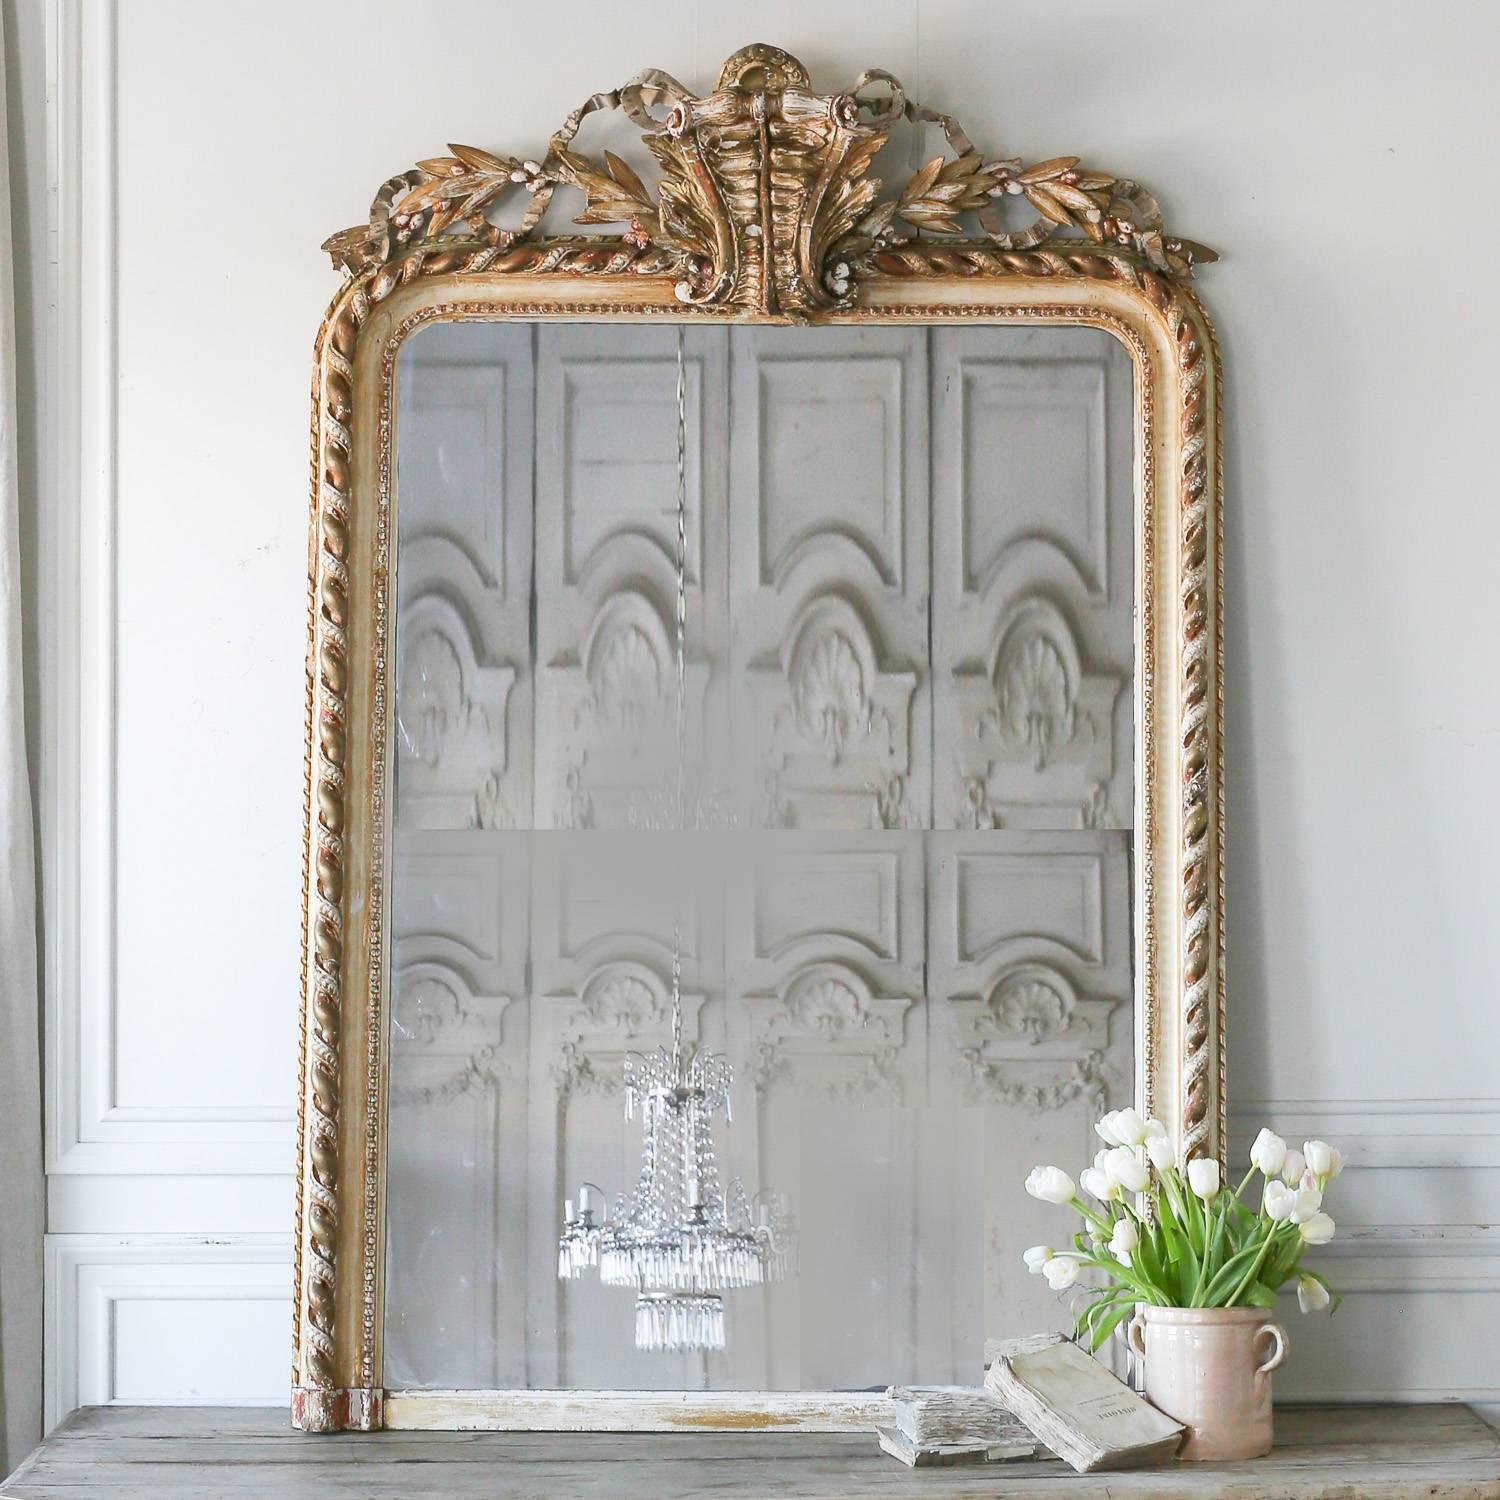 Stunning antique mirror in light gilt and distressed white finish. Light scratches on the glass showcase the age of this beauty. Thick, twisting ropes decorate the frame and an elaborate fern leaf sits prominently top the crest. Flanked by leaves